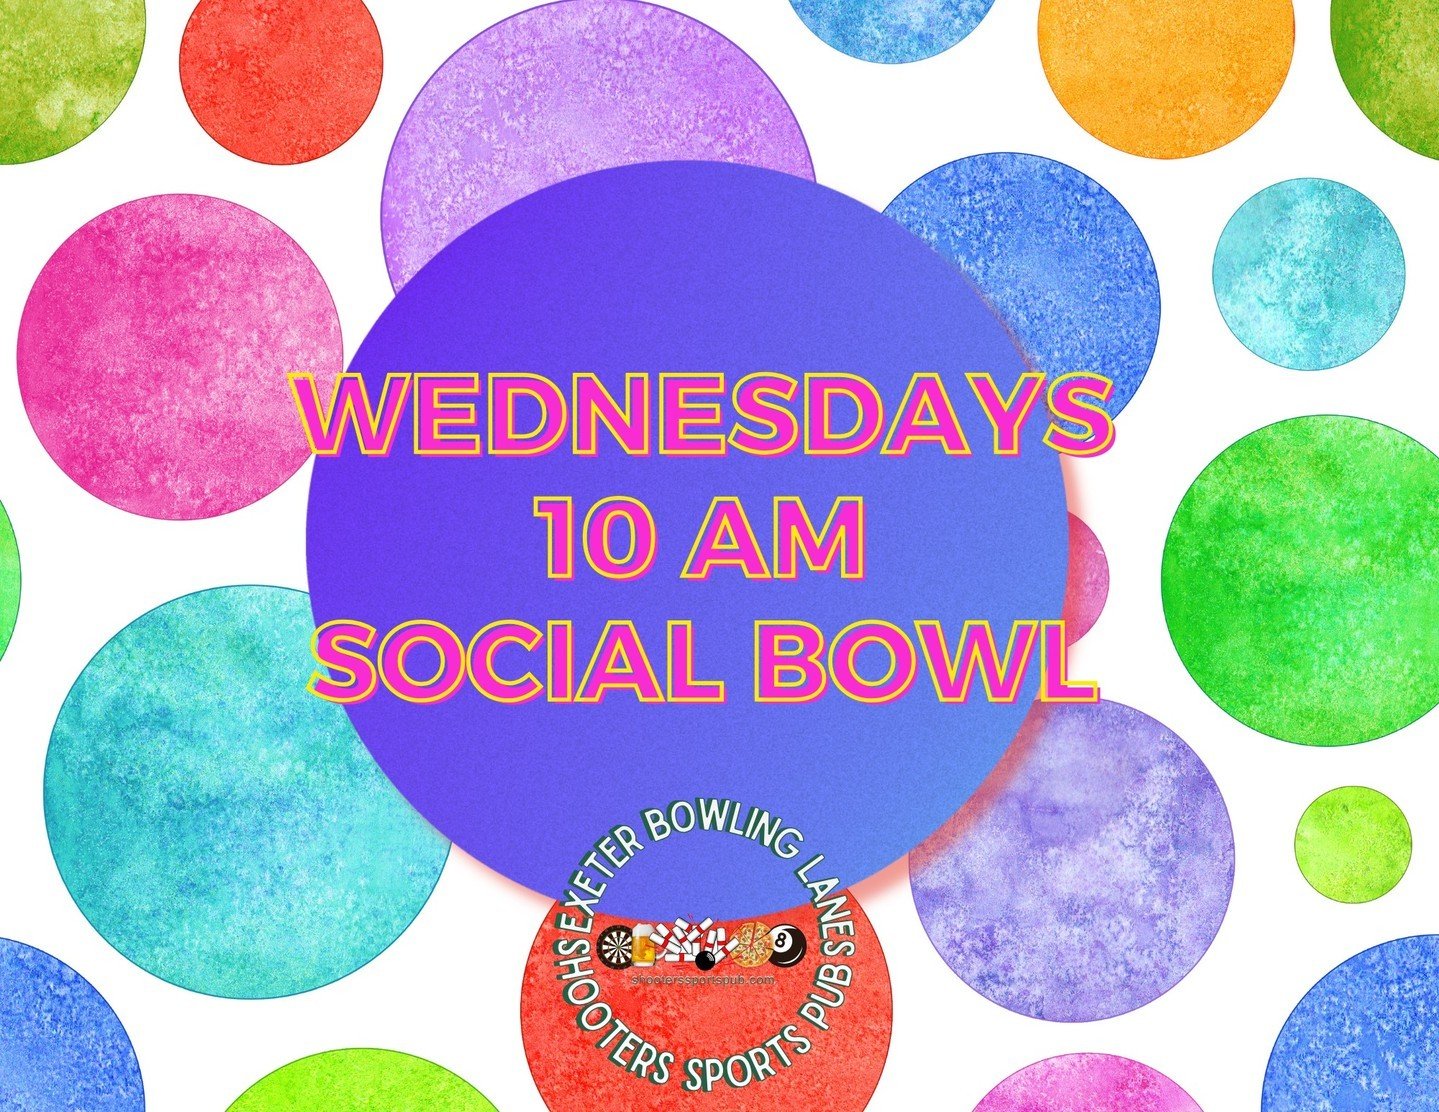 Rise and Shine, Bowlers! ☀️🎳 Our Social Bowl is the perfect midweek pick-me-up. Roll on in at 10 am this Wednesday for pins, pals, and plenty of laughs!